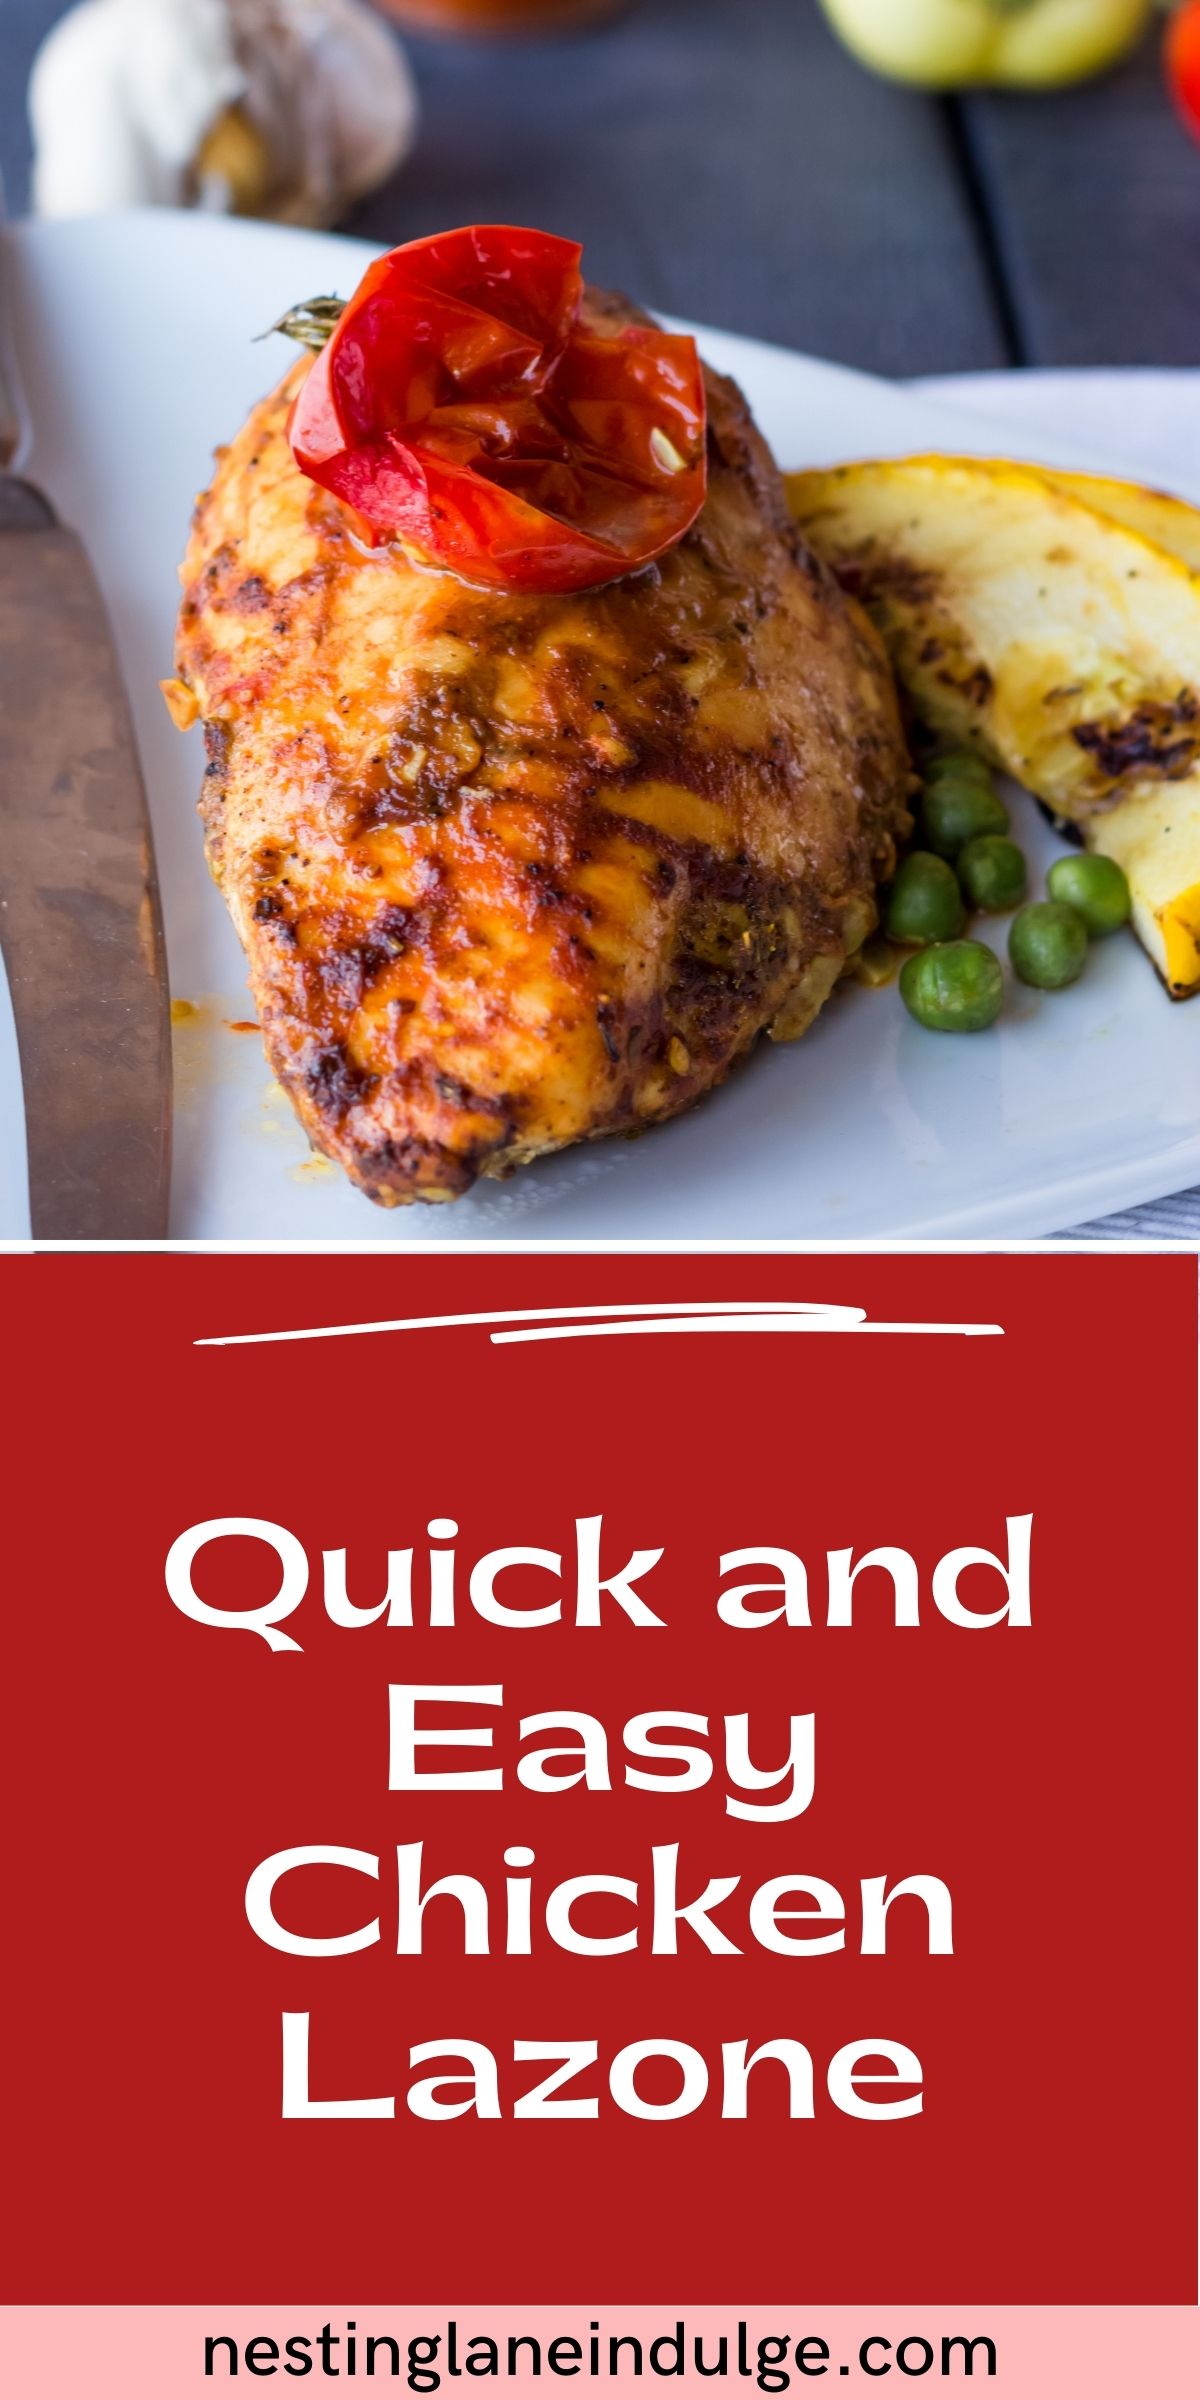 Graphic for Pinterest of Quick and Easy Chicken Lazone Recipe.